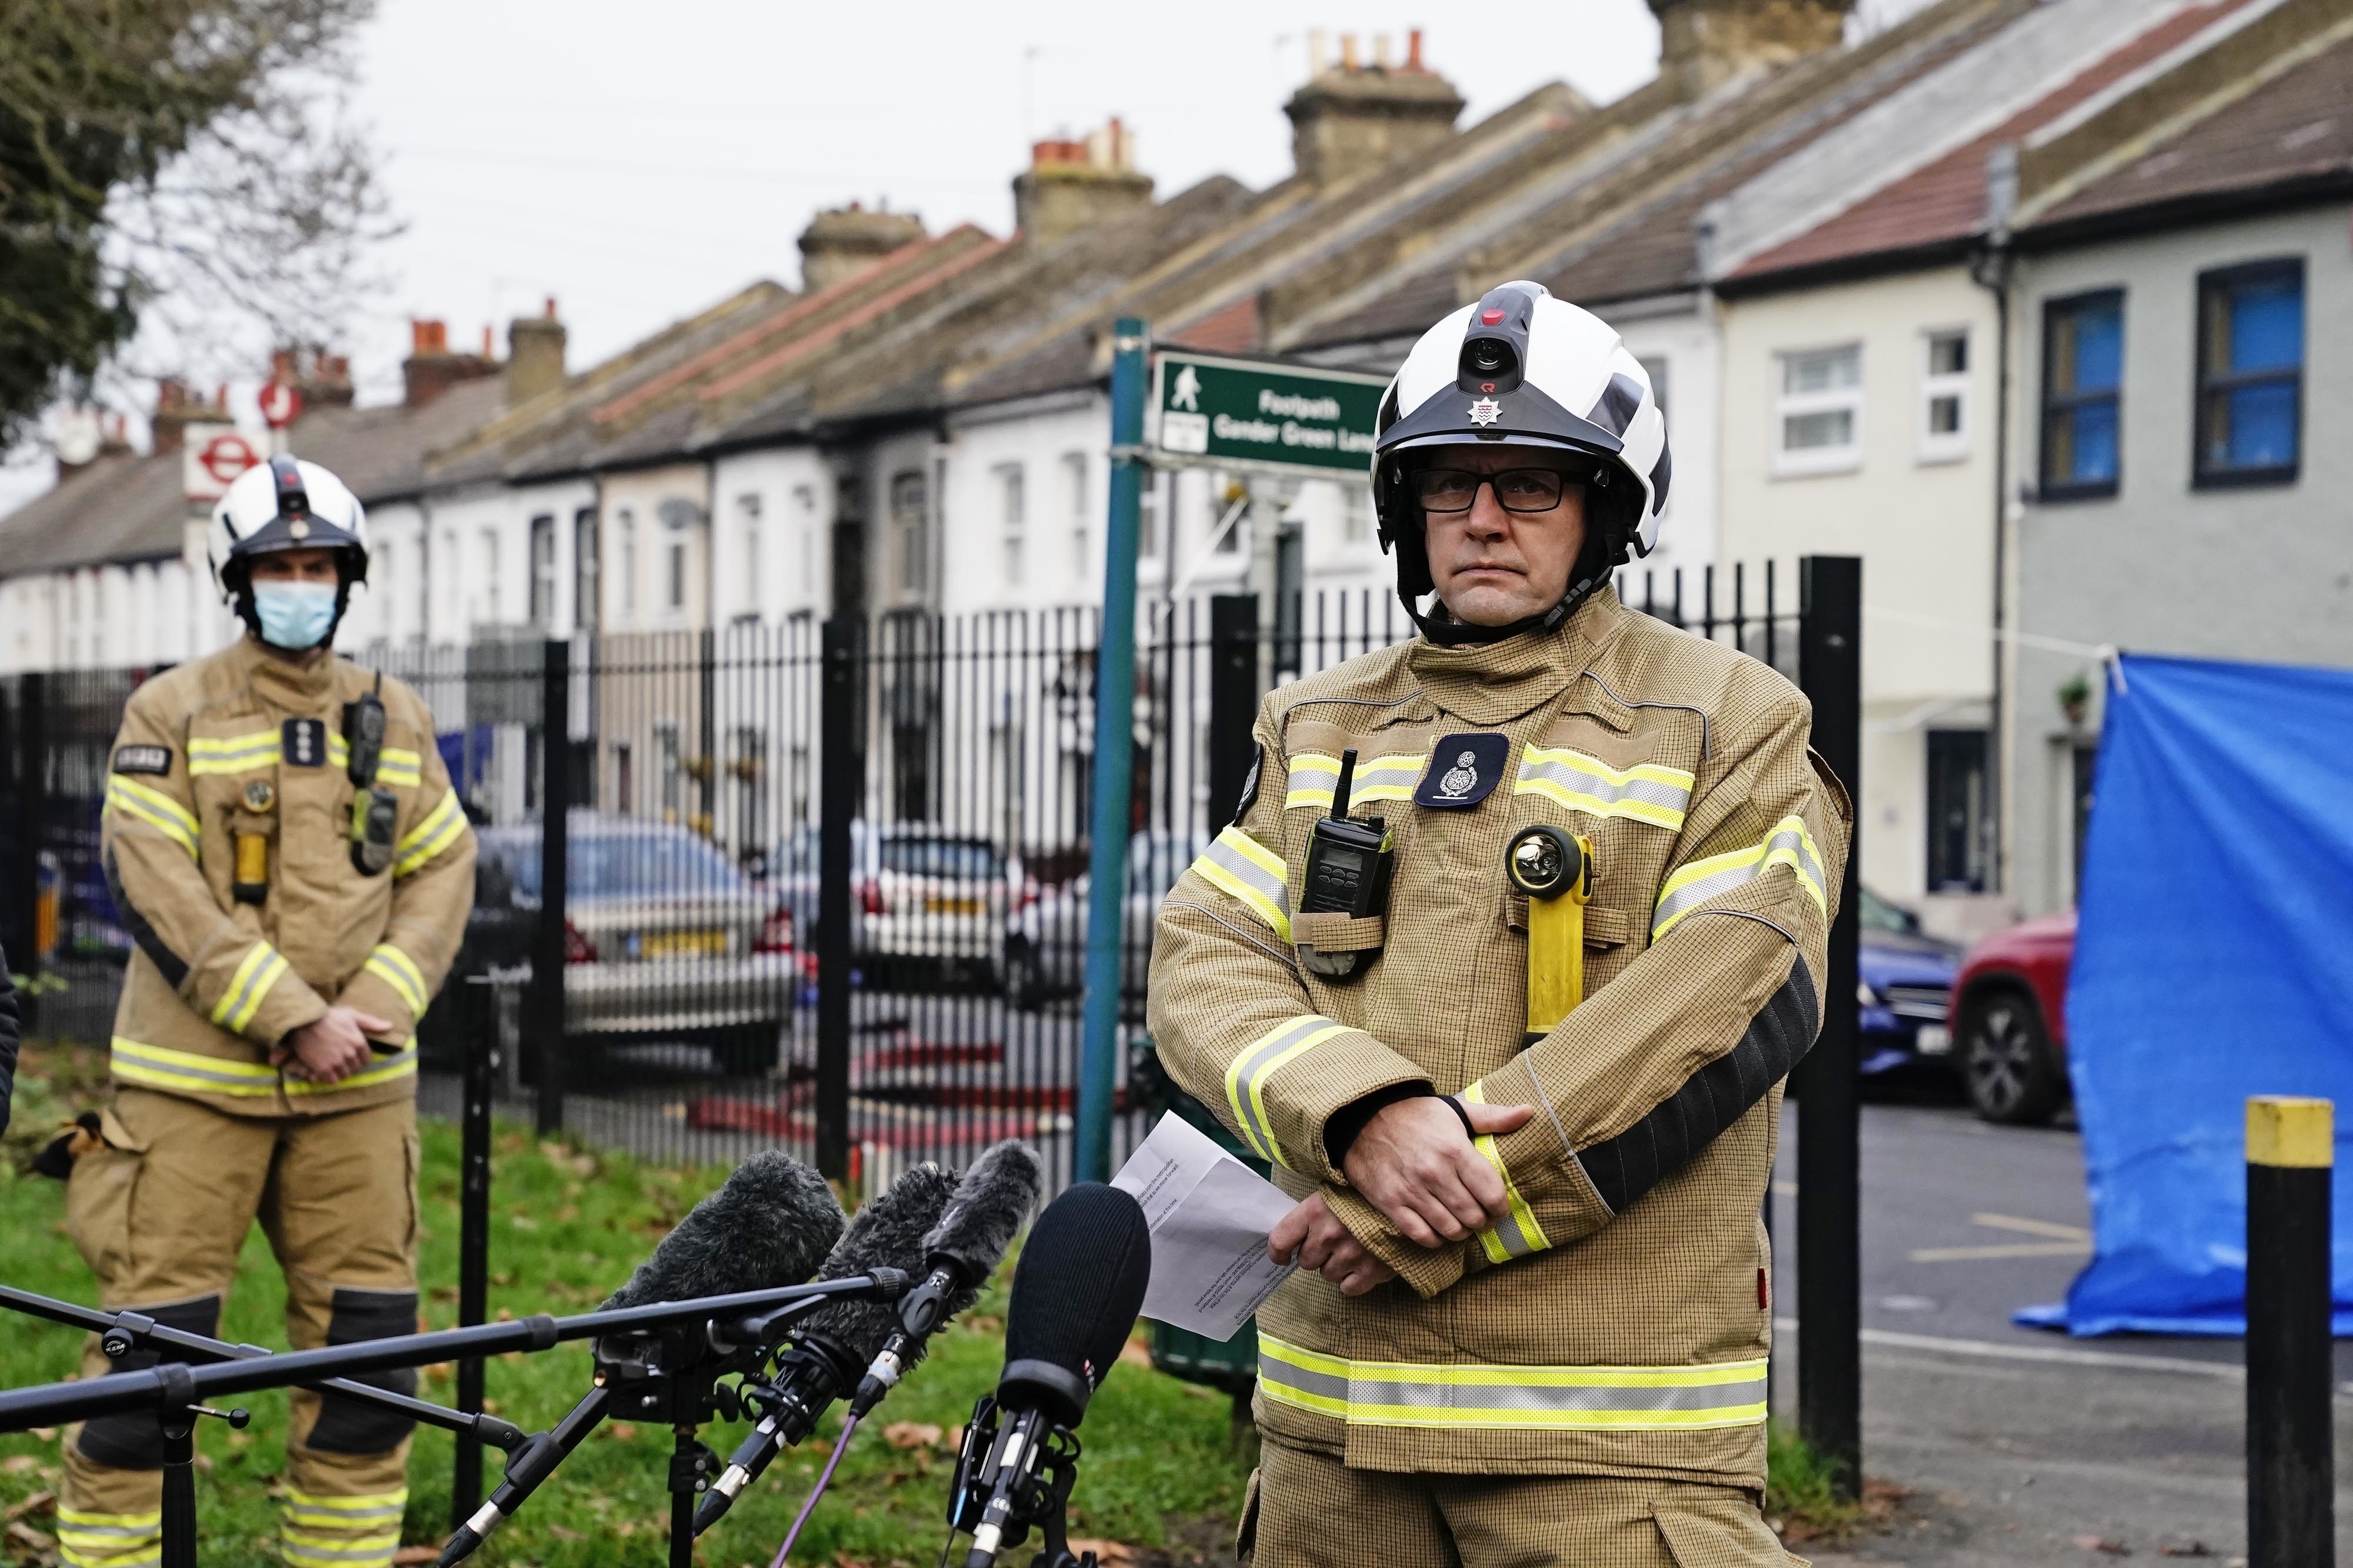 Firefighters at the scene in Sutton, south London, where four children have died following a fire at a house. Picture date: Thursday December 16, 2021. PA Photo. See PA story FIRE Sutton. Photo credit should read: Kirsty O'Connor/PA Wire